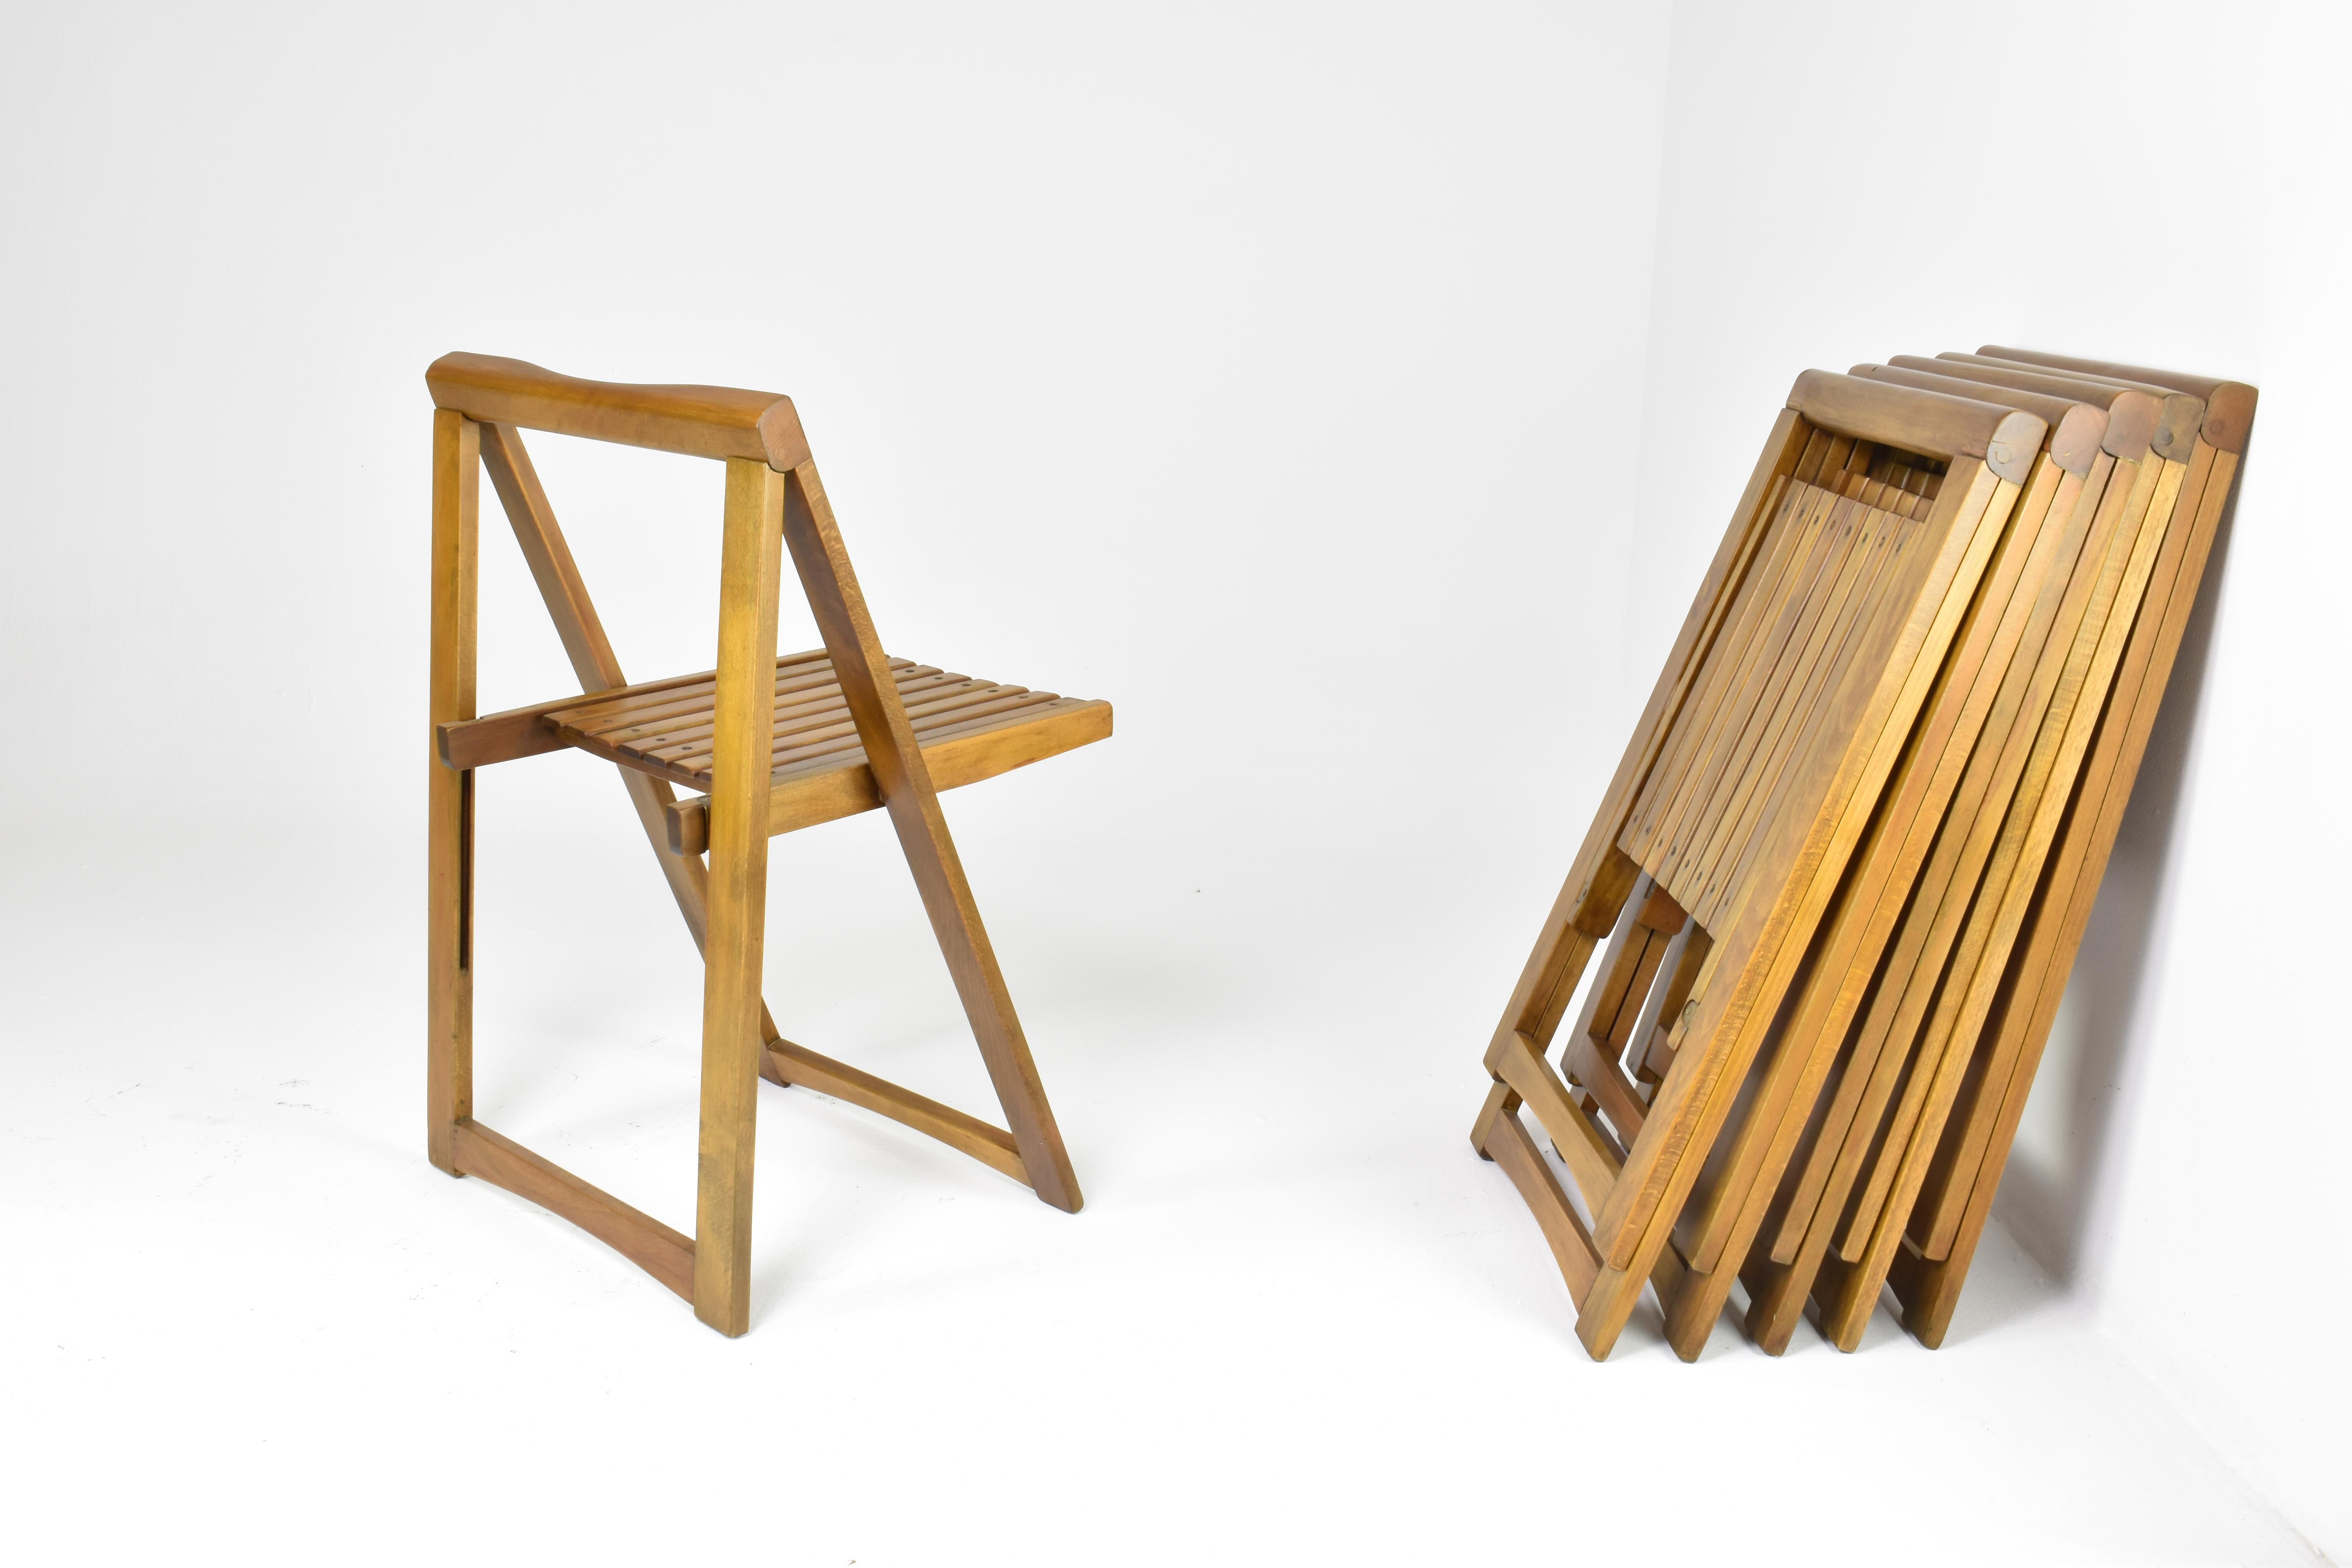 A set of six folding Italian chairs or garden chairs crafted out of solid beechwood, designed by Aldo Jacober for Alberto Bazzani in the 1960s.
 Known for their exquisite craftsmanship and timeless design, these chairs are a testimony to the quality